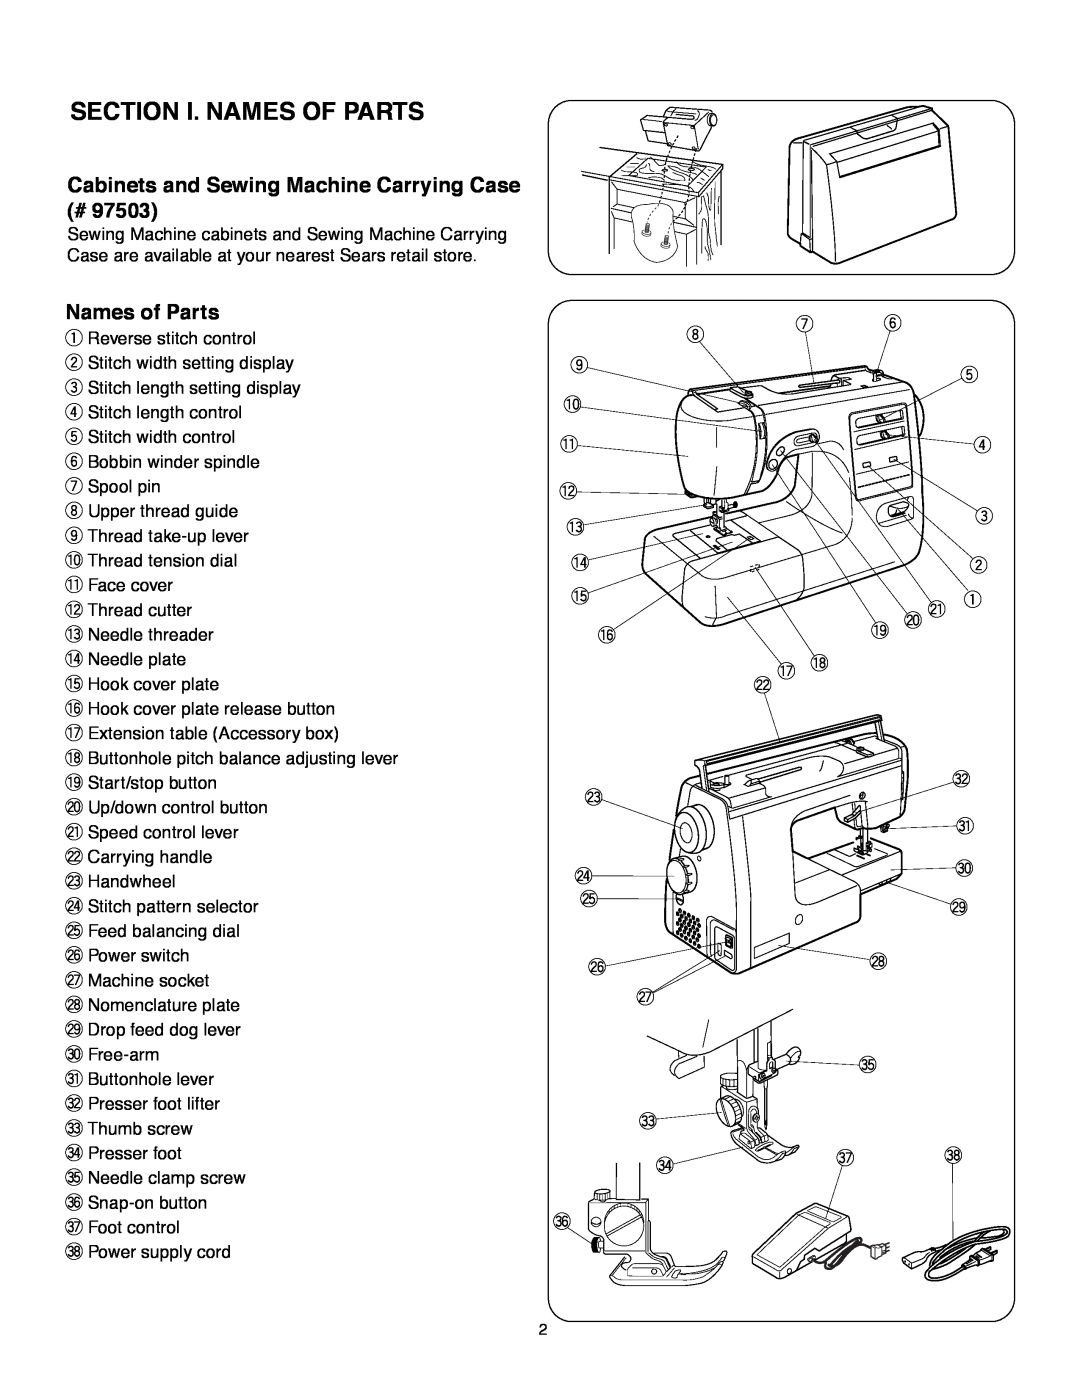 Janome MS-5027 instruction manual Section I. Names Of Parts, Cabinets and Sewing Machine Carrying Case #, Names of Parts 